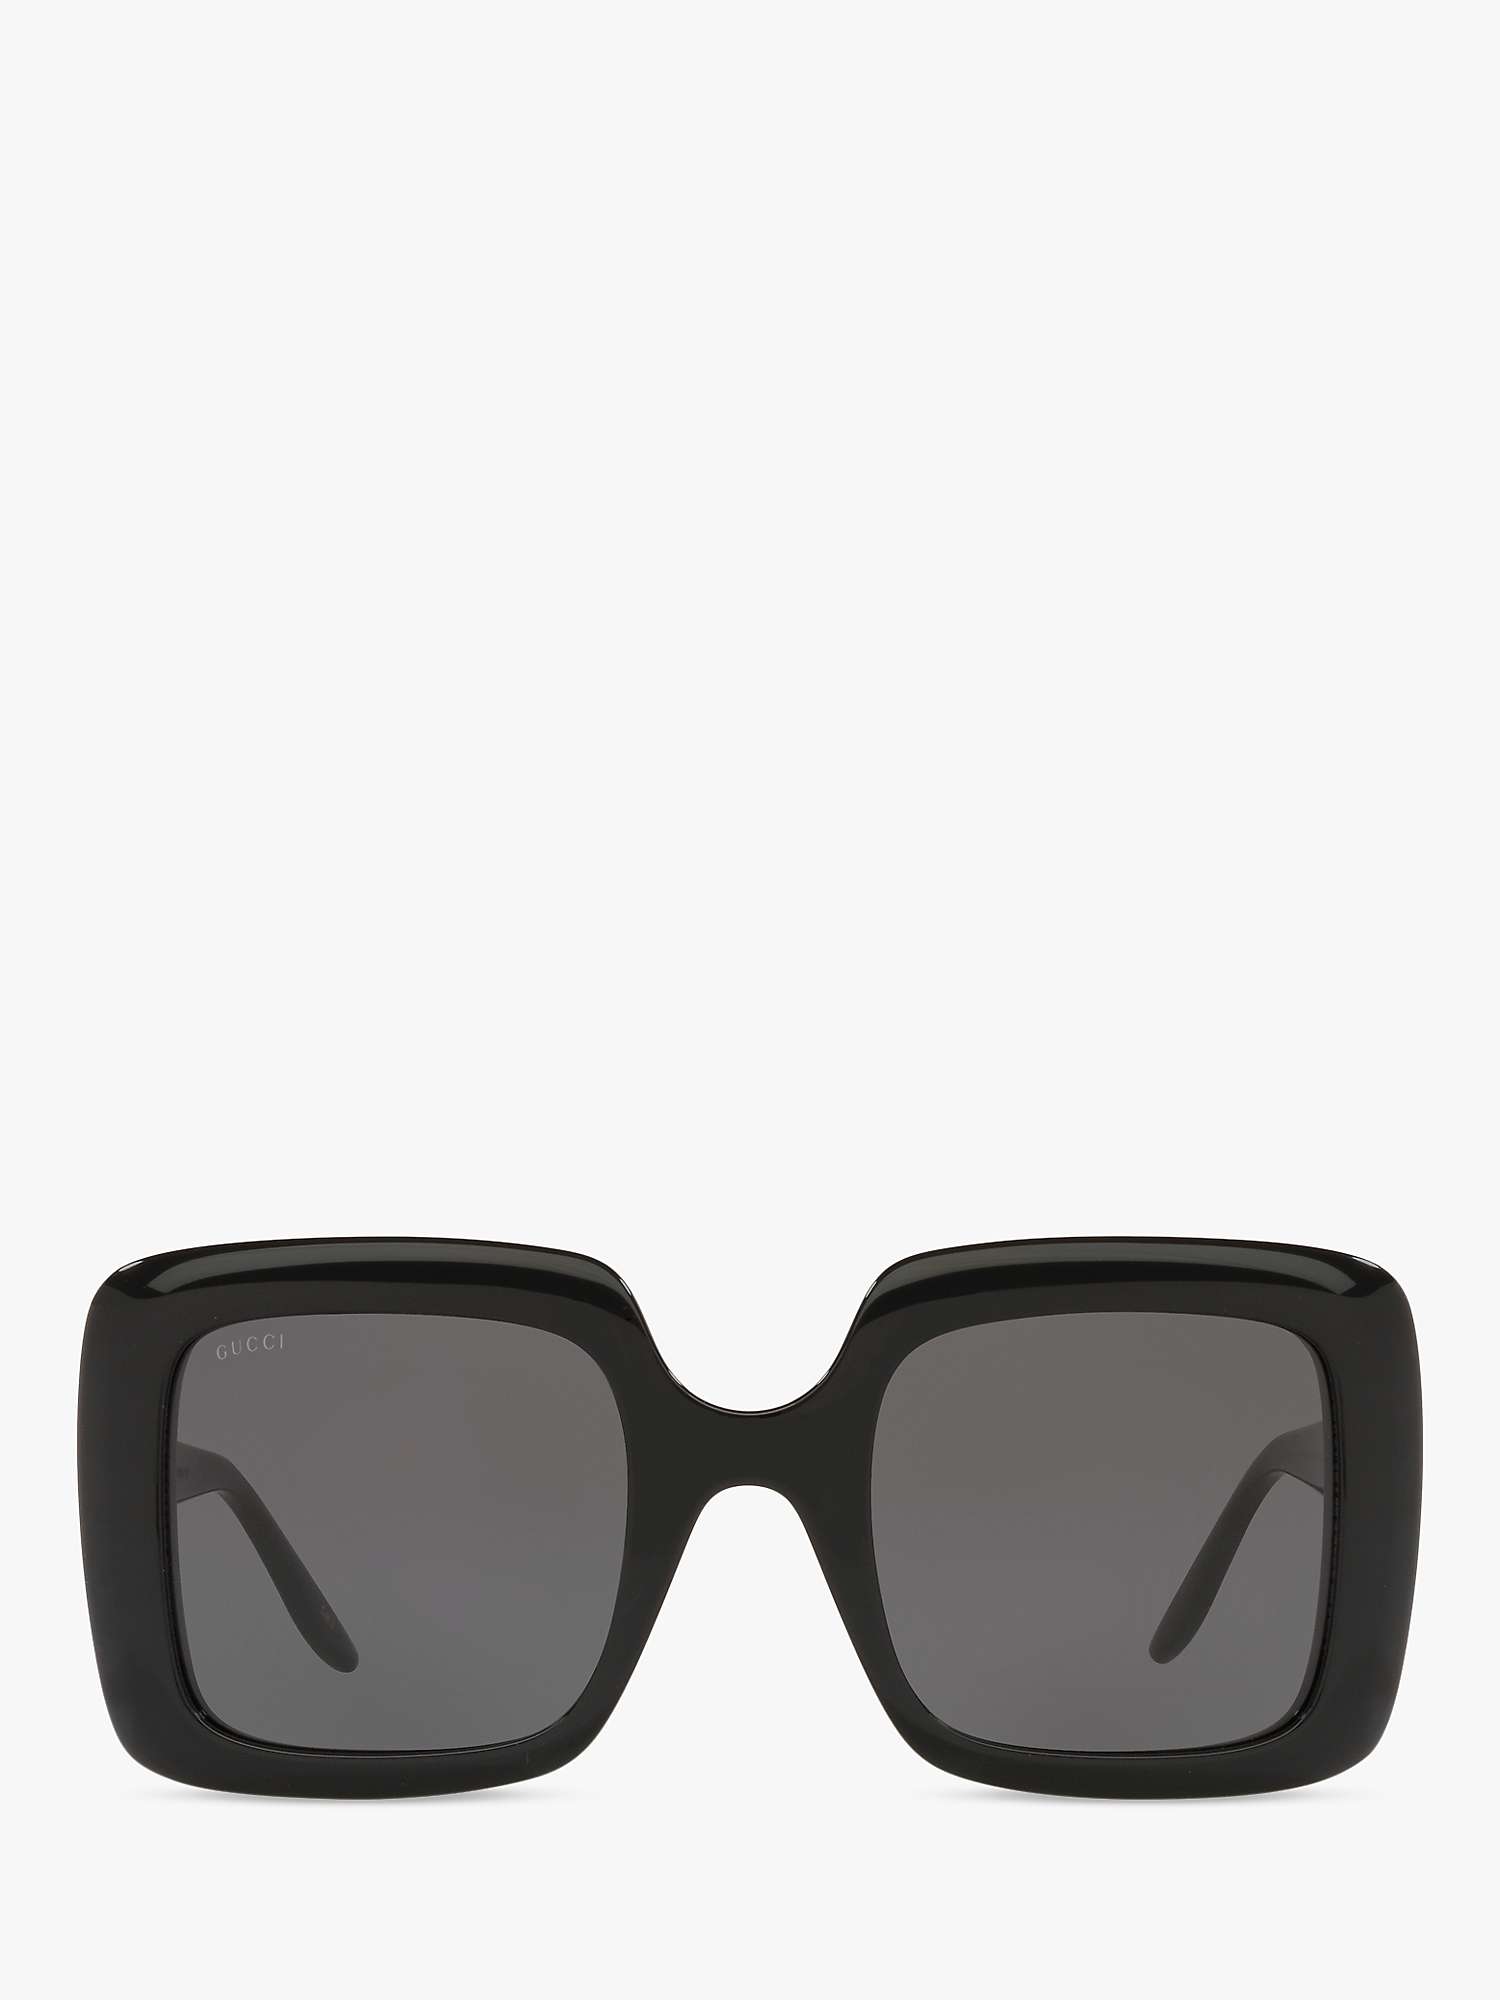 Buy Gucci GG0896S Women's Square Sunglasses Online at johnlewis.com